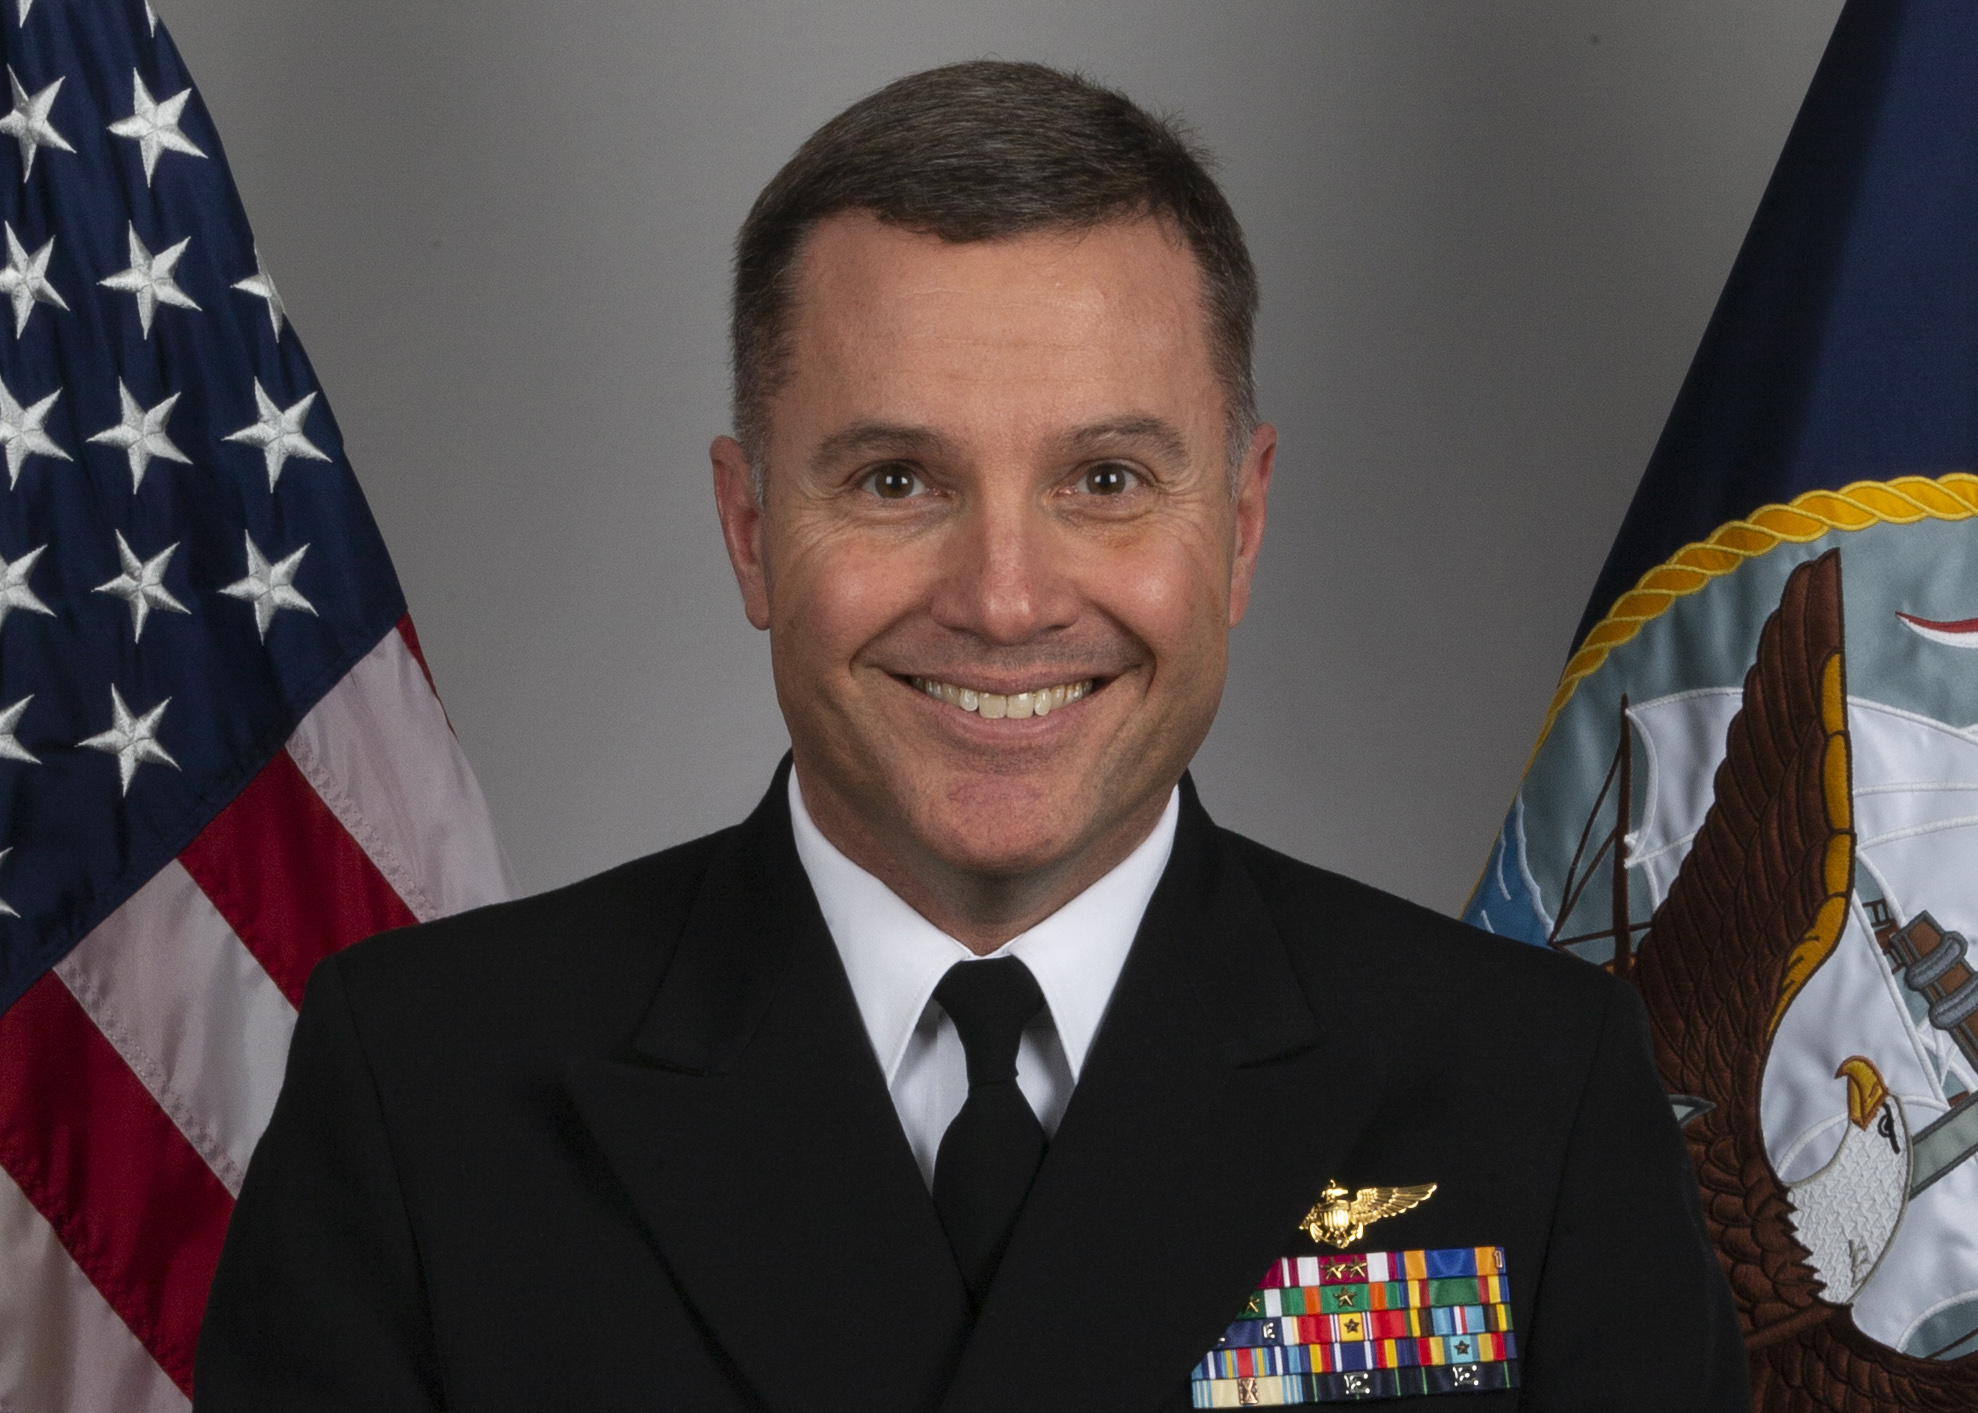 A white man in a dark blue uniform looks directly into the camera for an official portrait with the U.S. flag and U.S. Navy flag on each side.